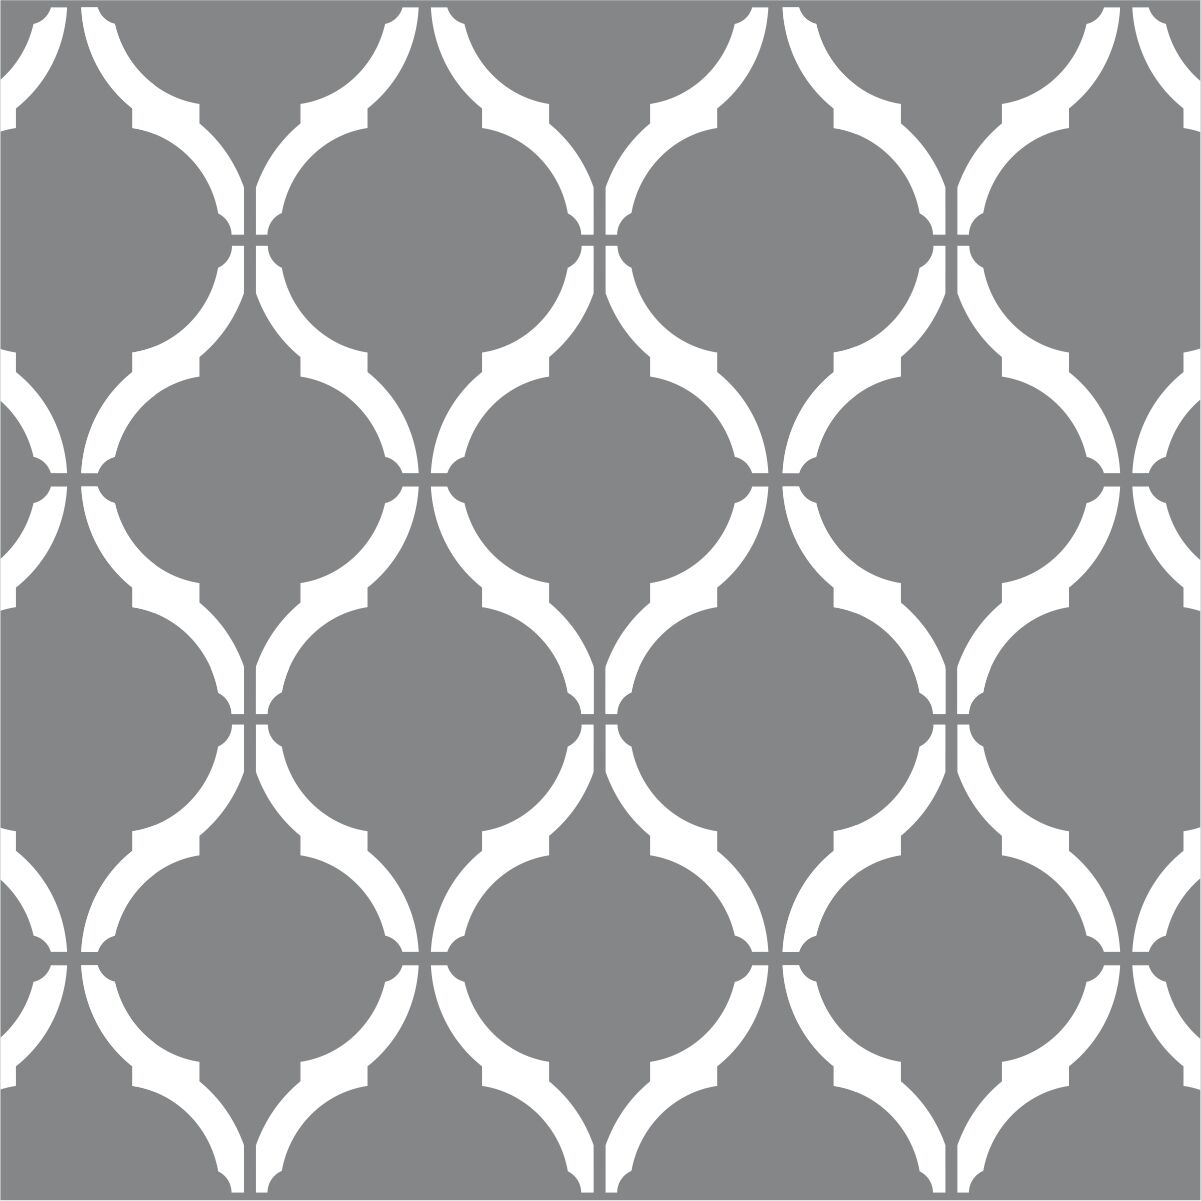 Moroccan Wall Stencil Large 12"x9" Craft Airbrush Pattern Painting Paint Art